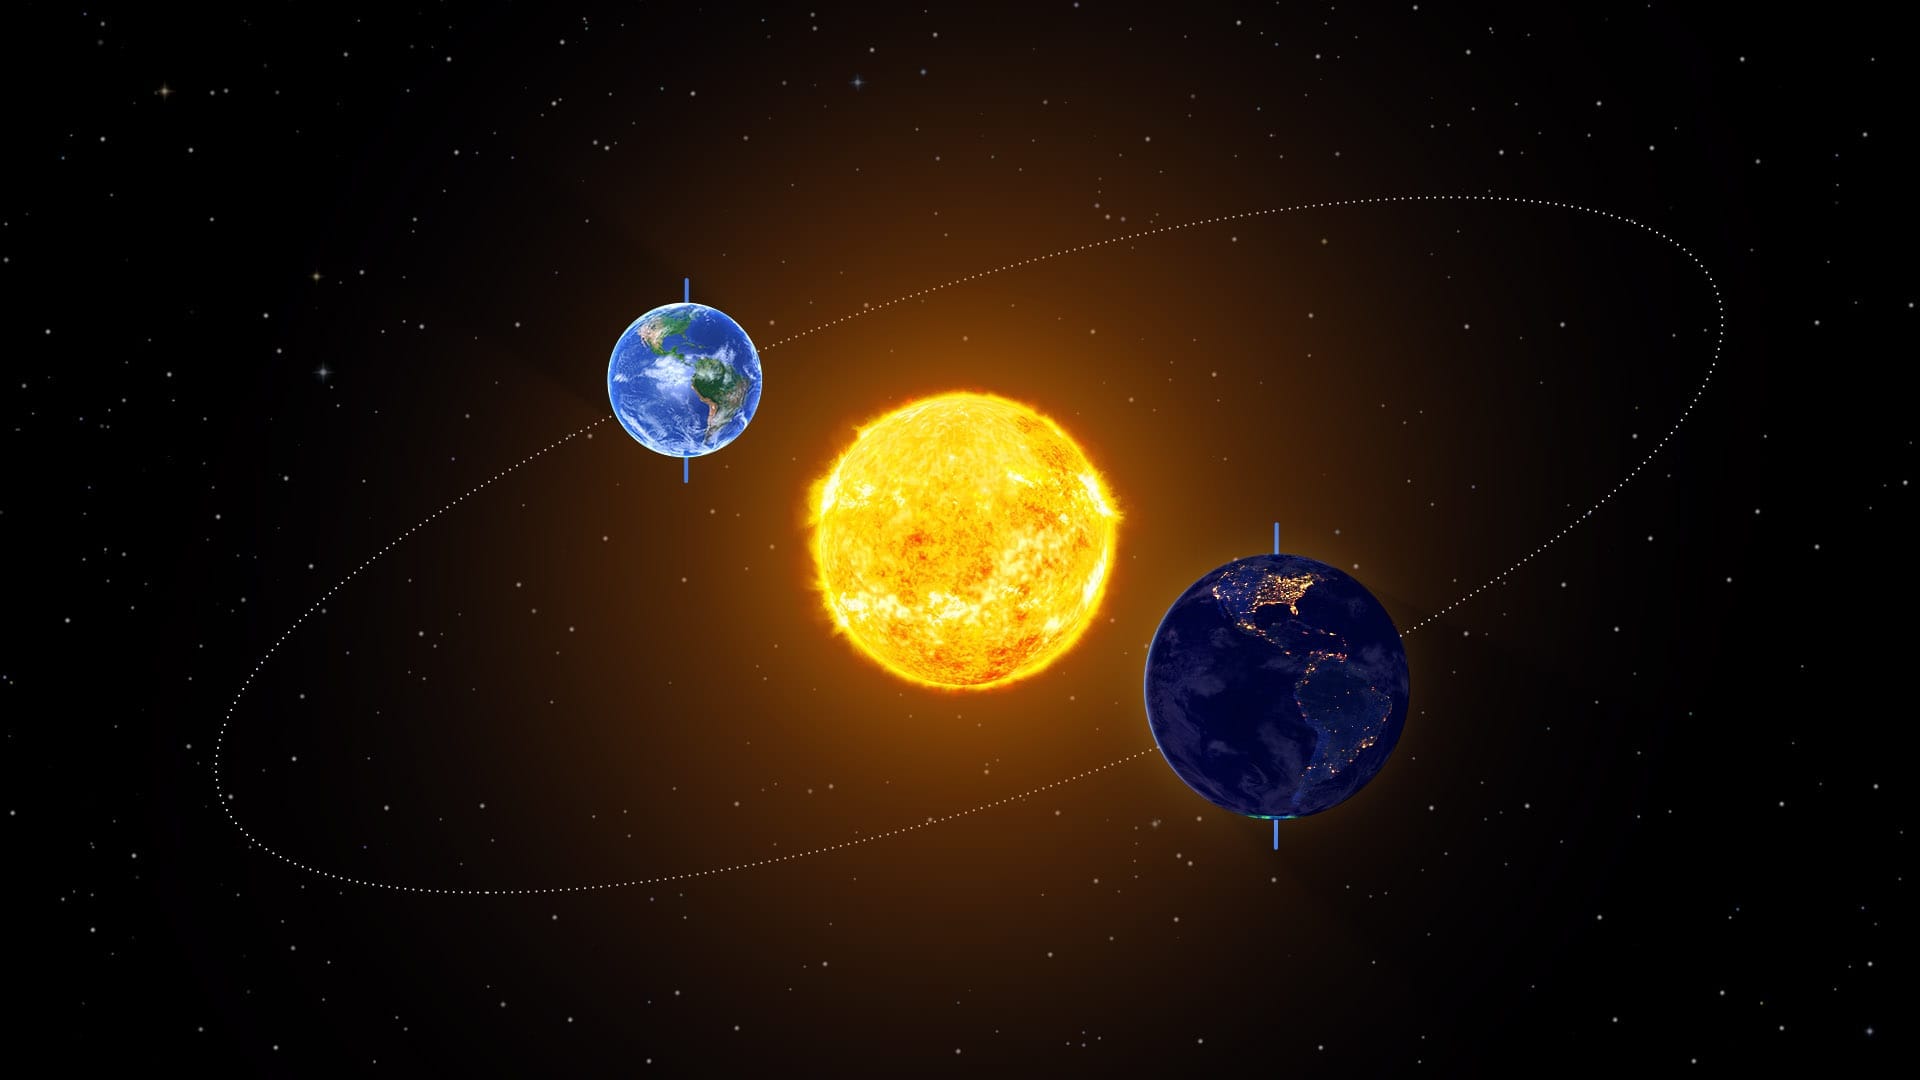 March equinox and September equinox